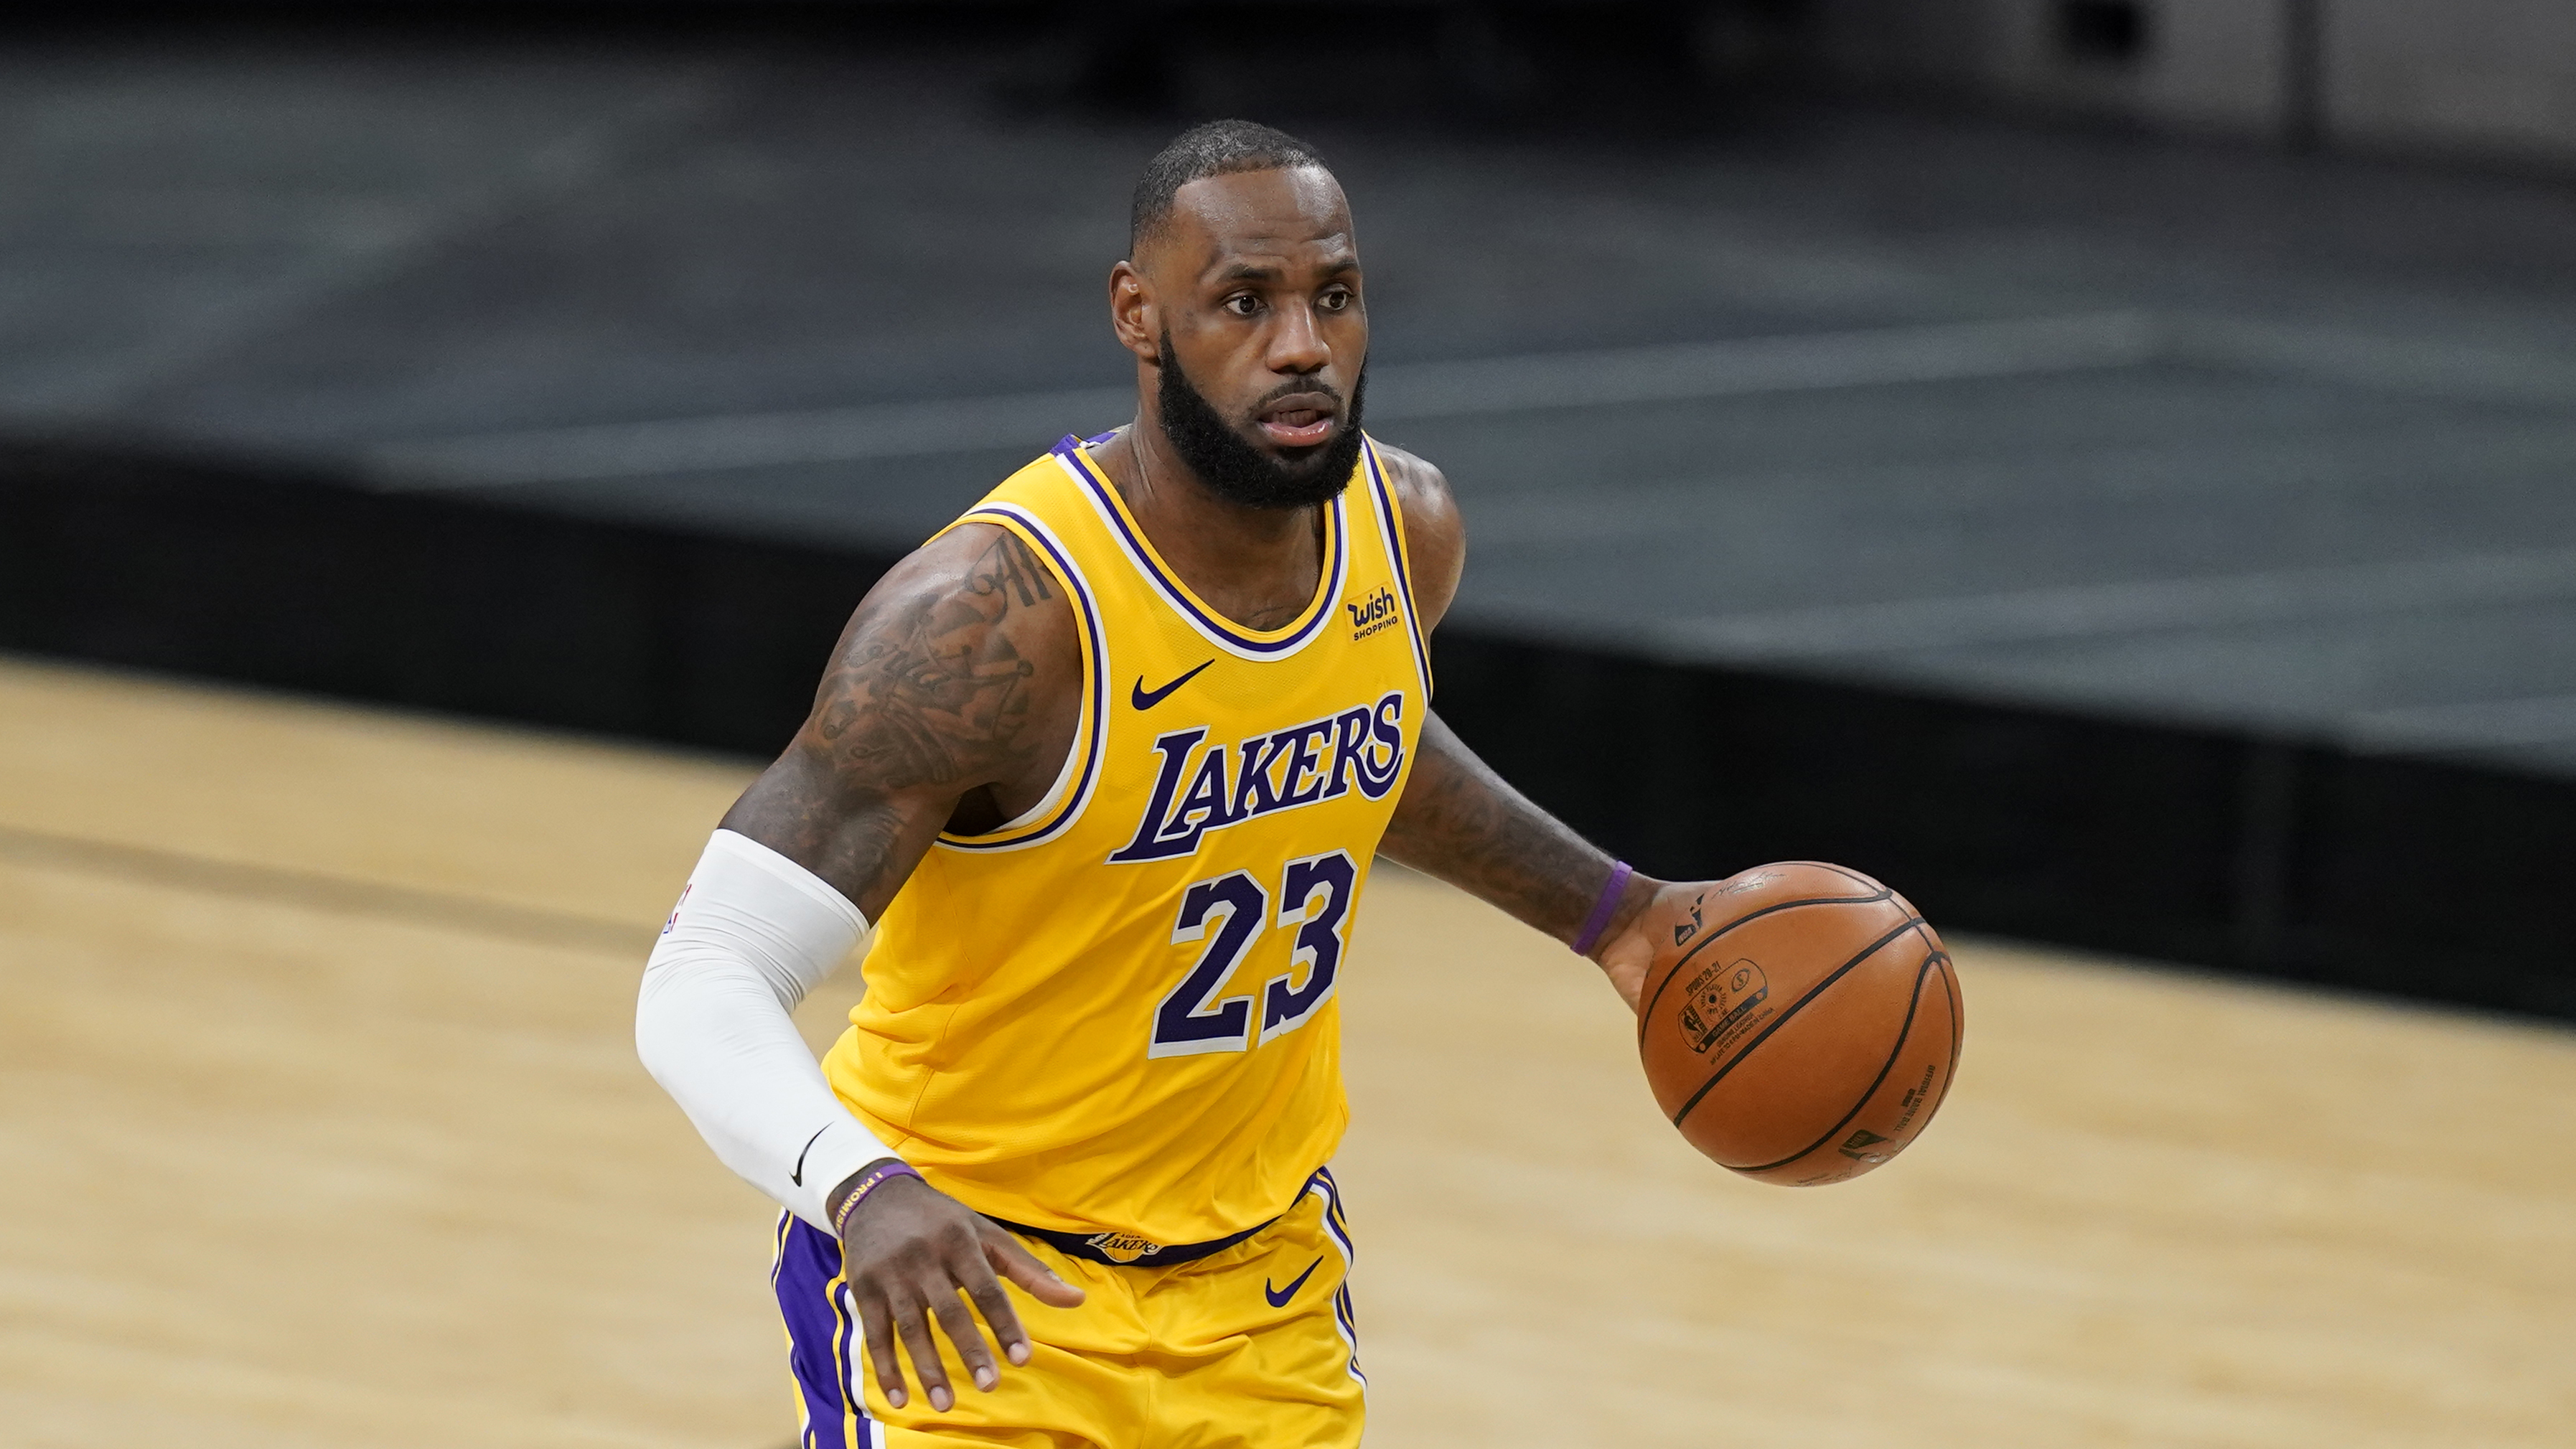 Black people in America are scared,' says LeBron James after Jacob